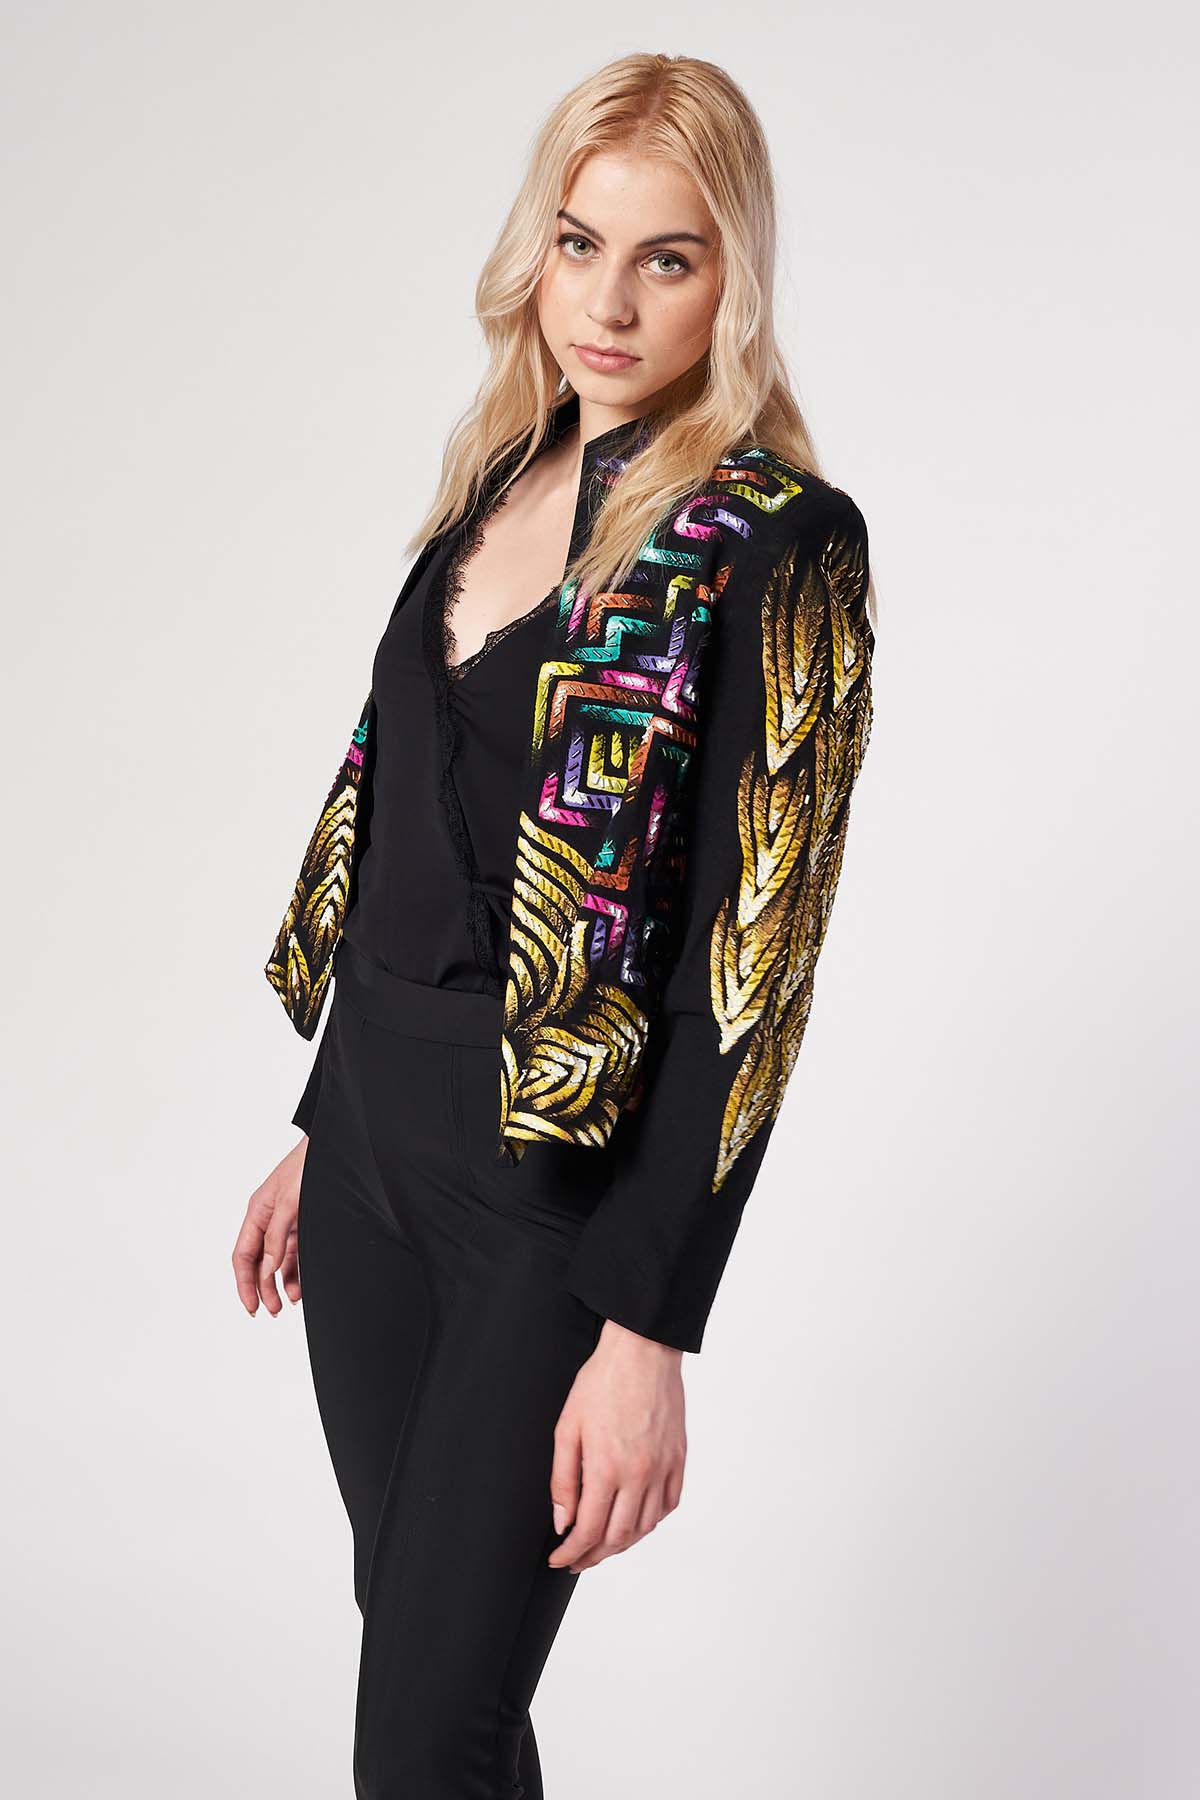 HAND-PAINTED AND HAND-EMBROIDERED JACKET - PREHISPANICO COLOR